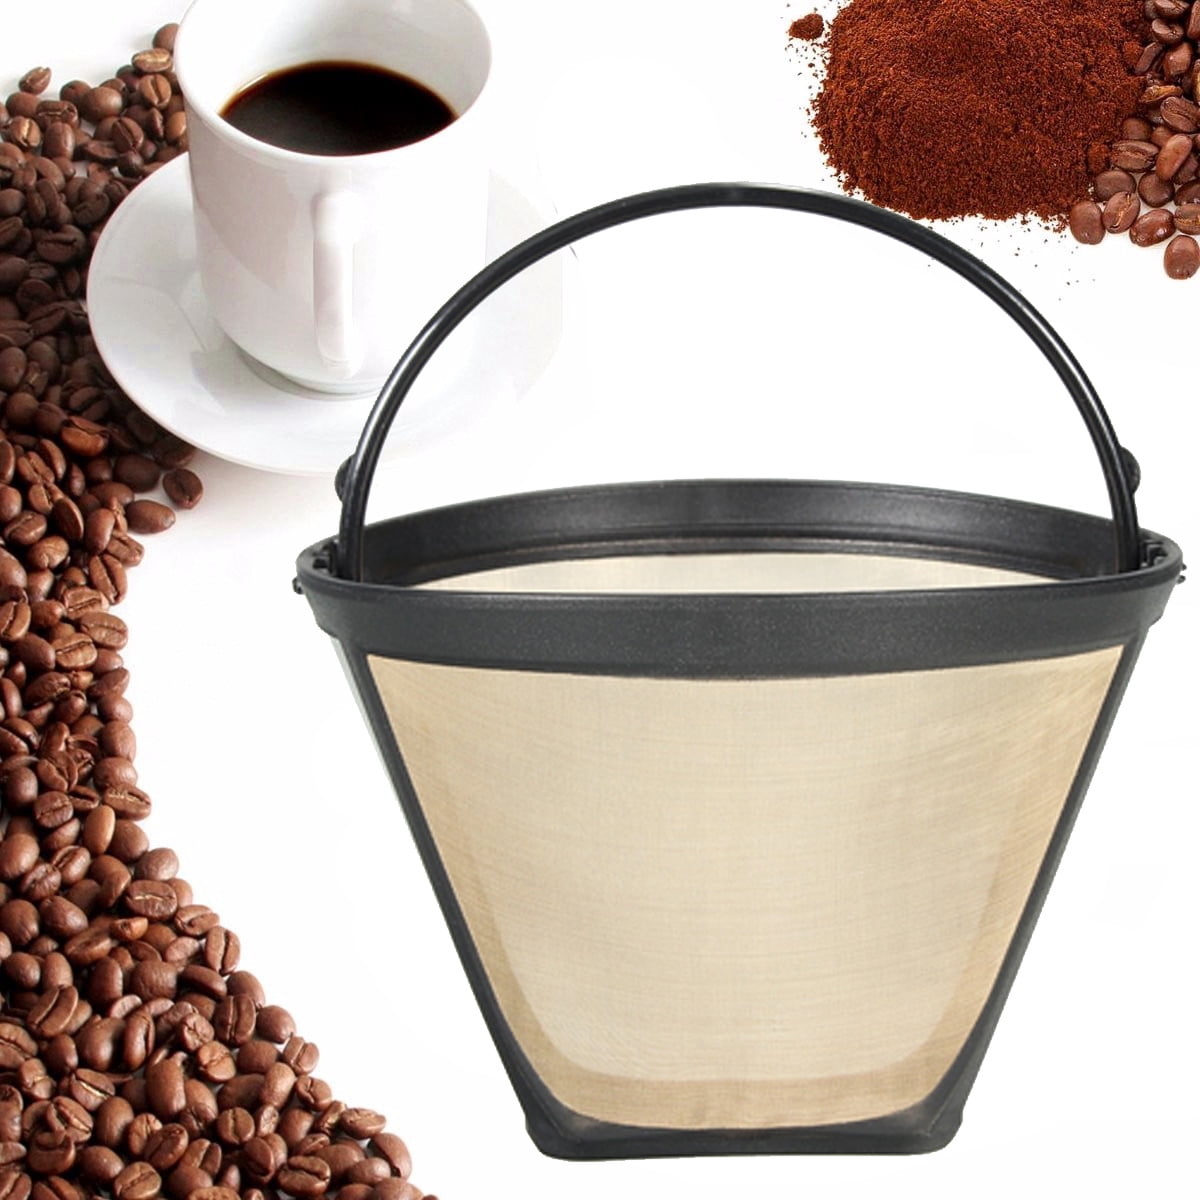 Reusable Gold Tone Permanent Cone Shape Coffee Filter Mesh Basket Coffee Maker 